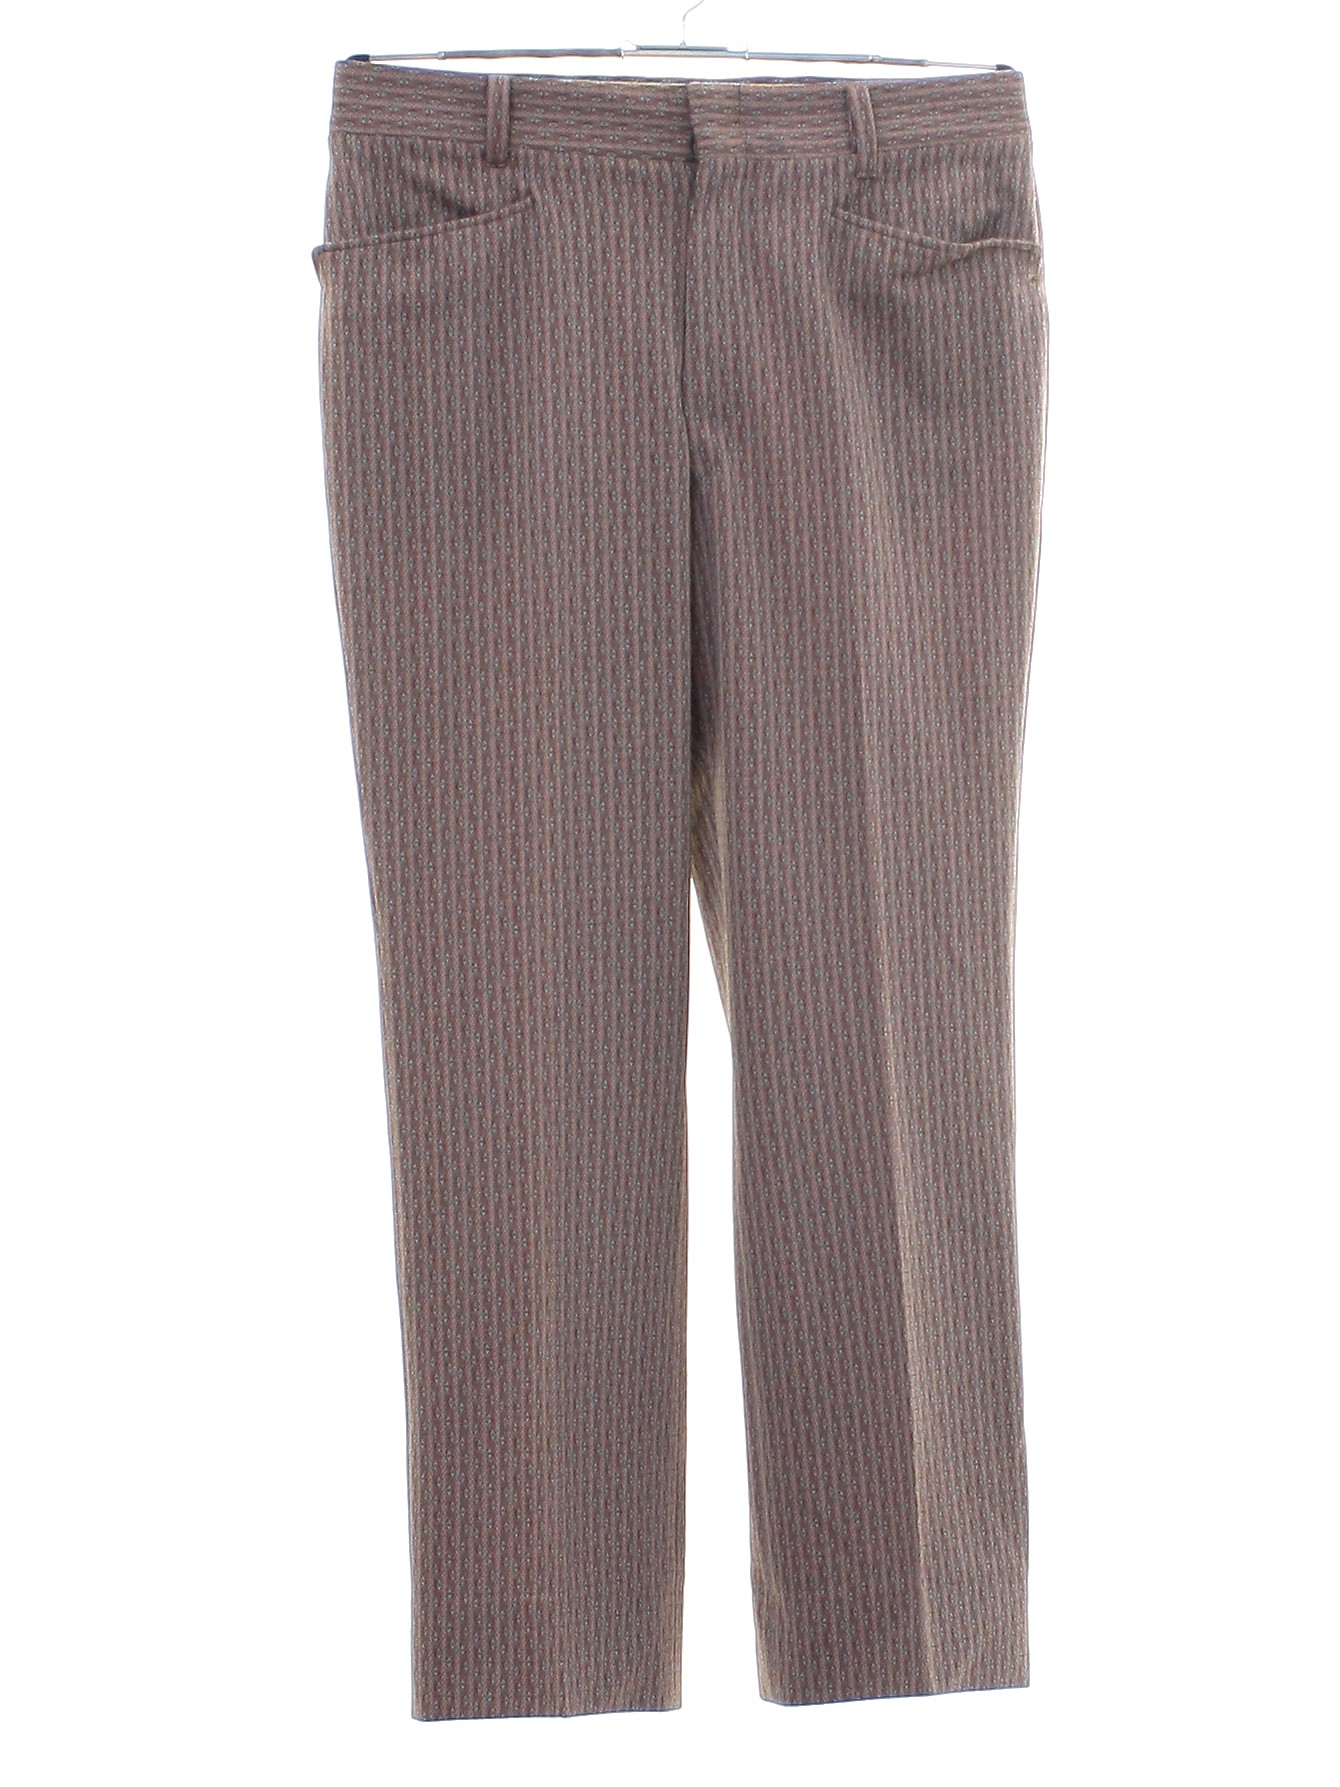 1970's Vintage Pants: 70s -No Label- Mens coral, brown, and gray thin ...